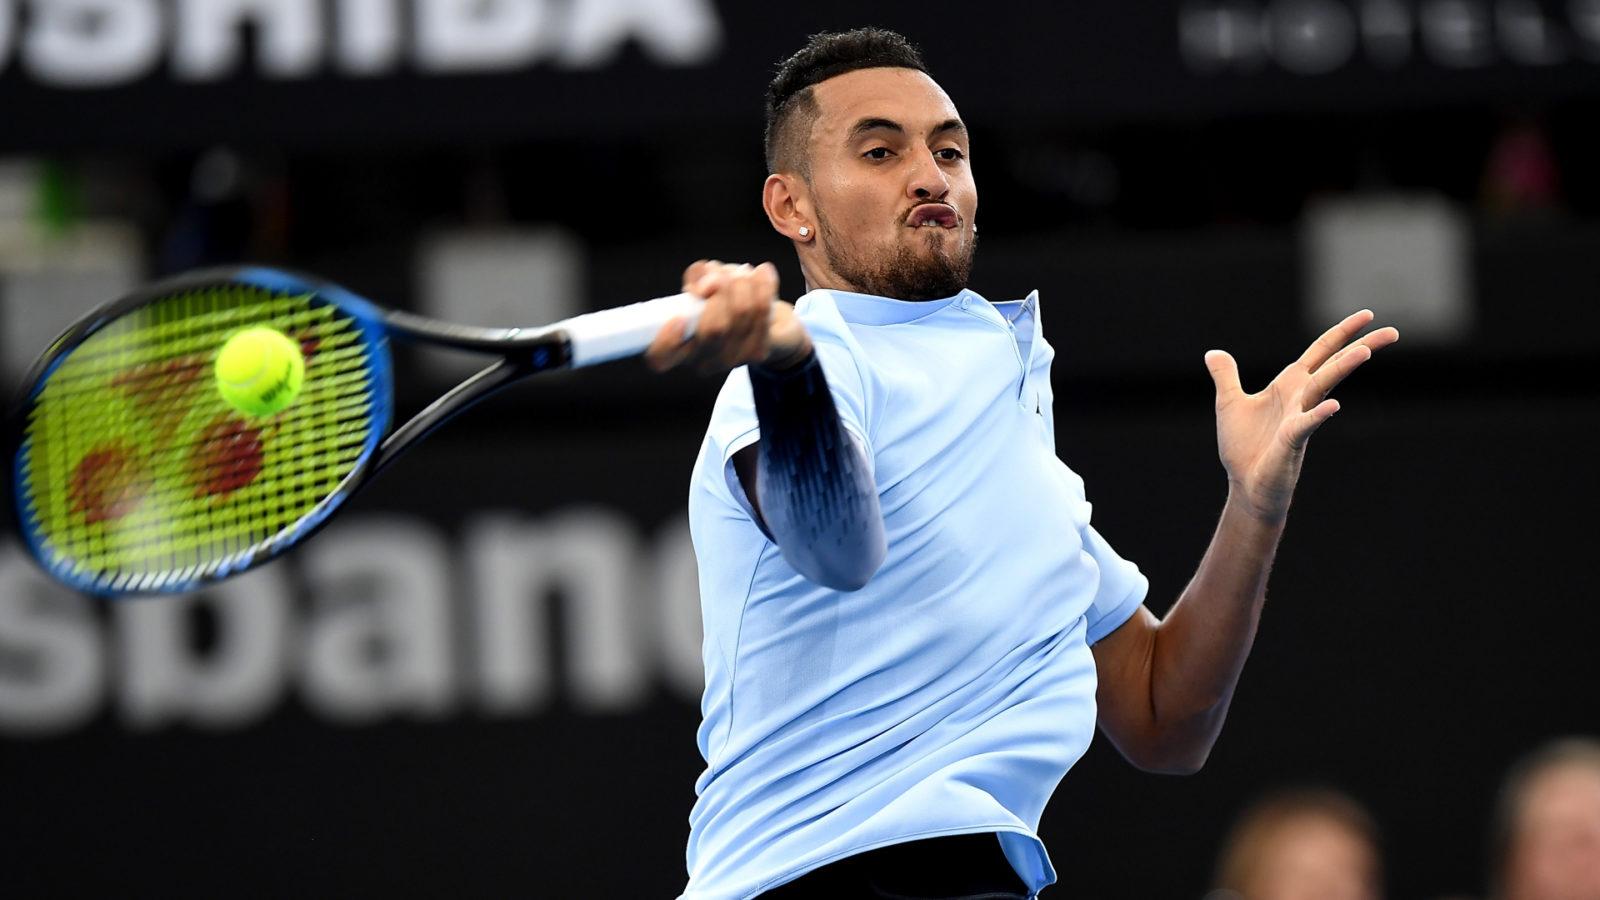 I'm sick of it': Nick Kyrgios says he'll quit tour if he wins Aus